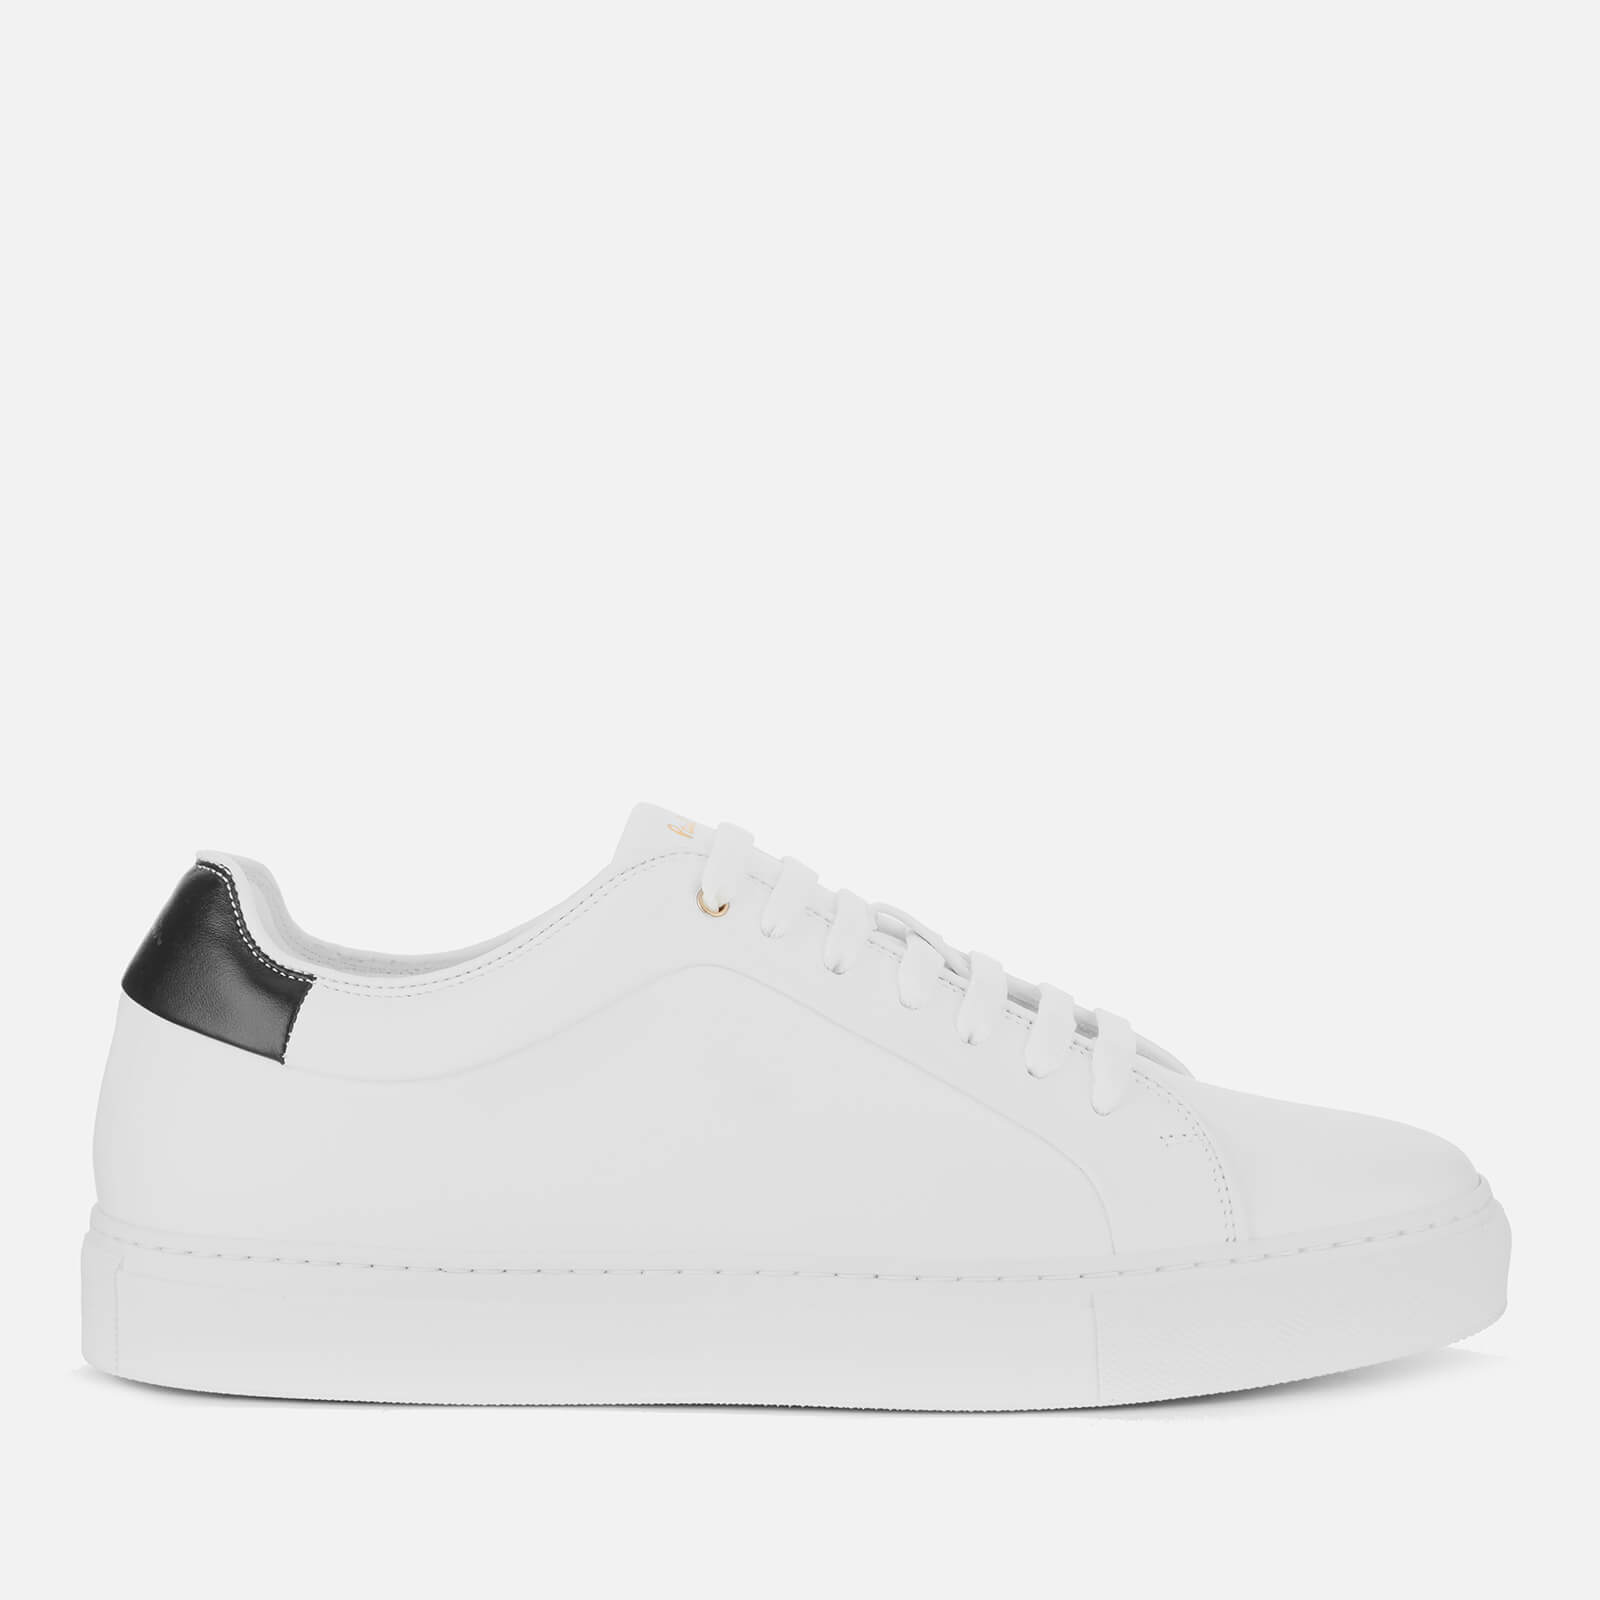 Paul Smith Men's Basso Leather Cupsole Trainers - White/Black Tab - UK 8